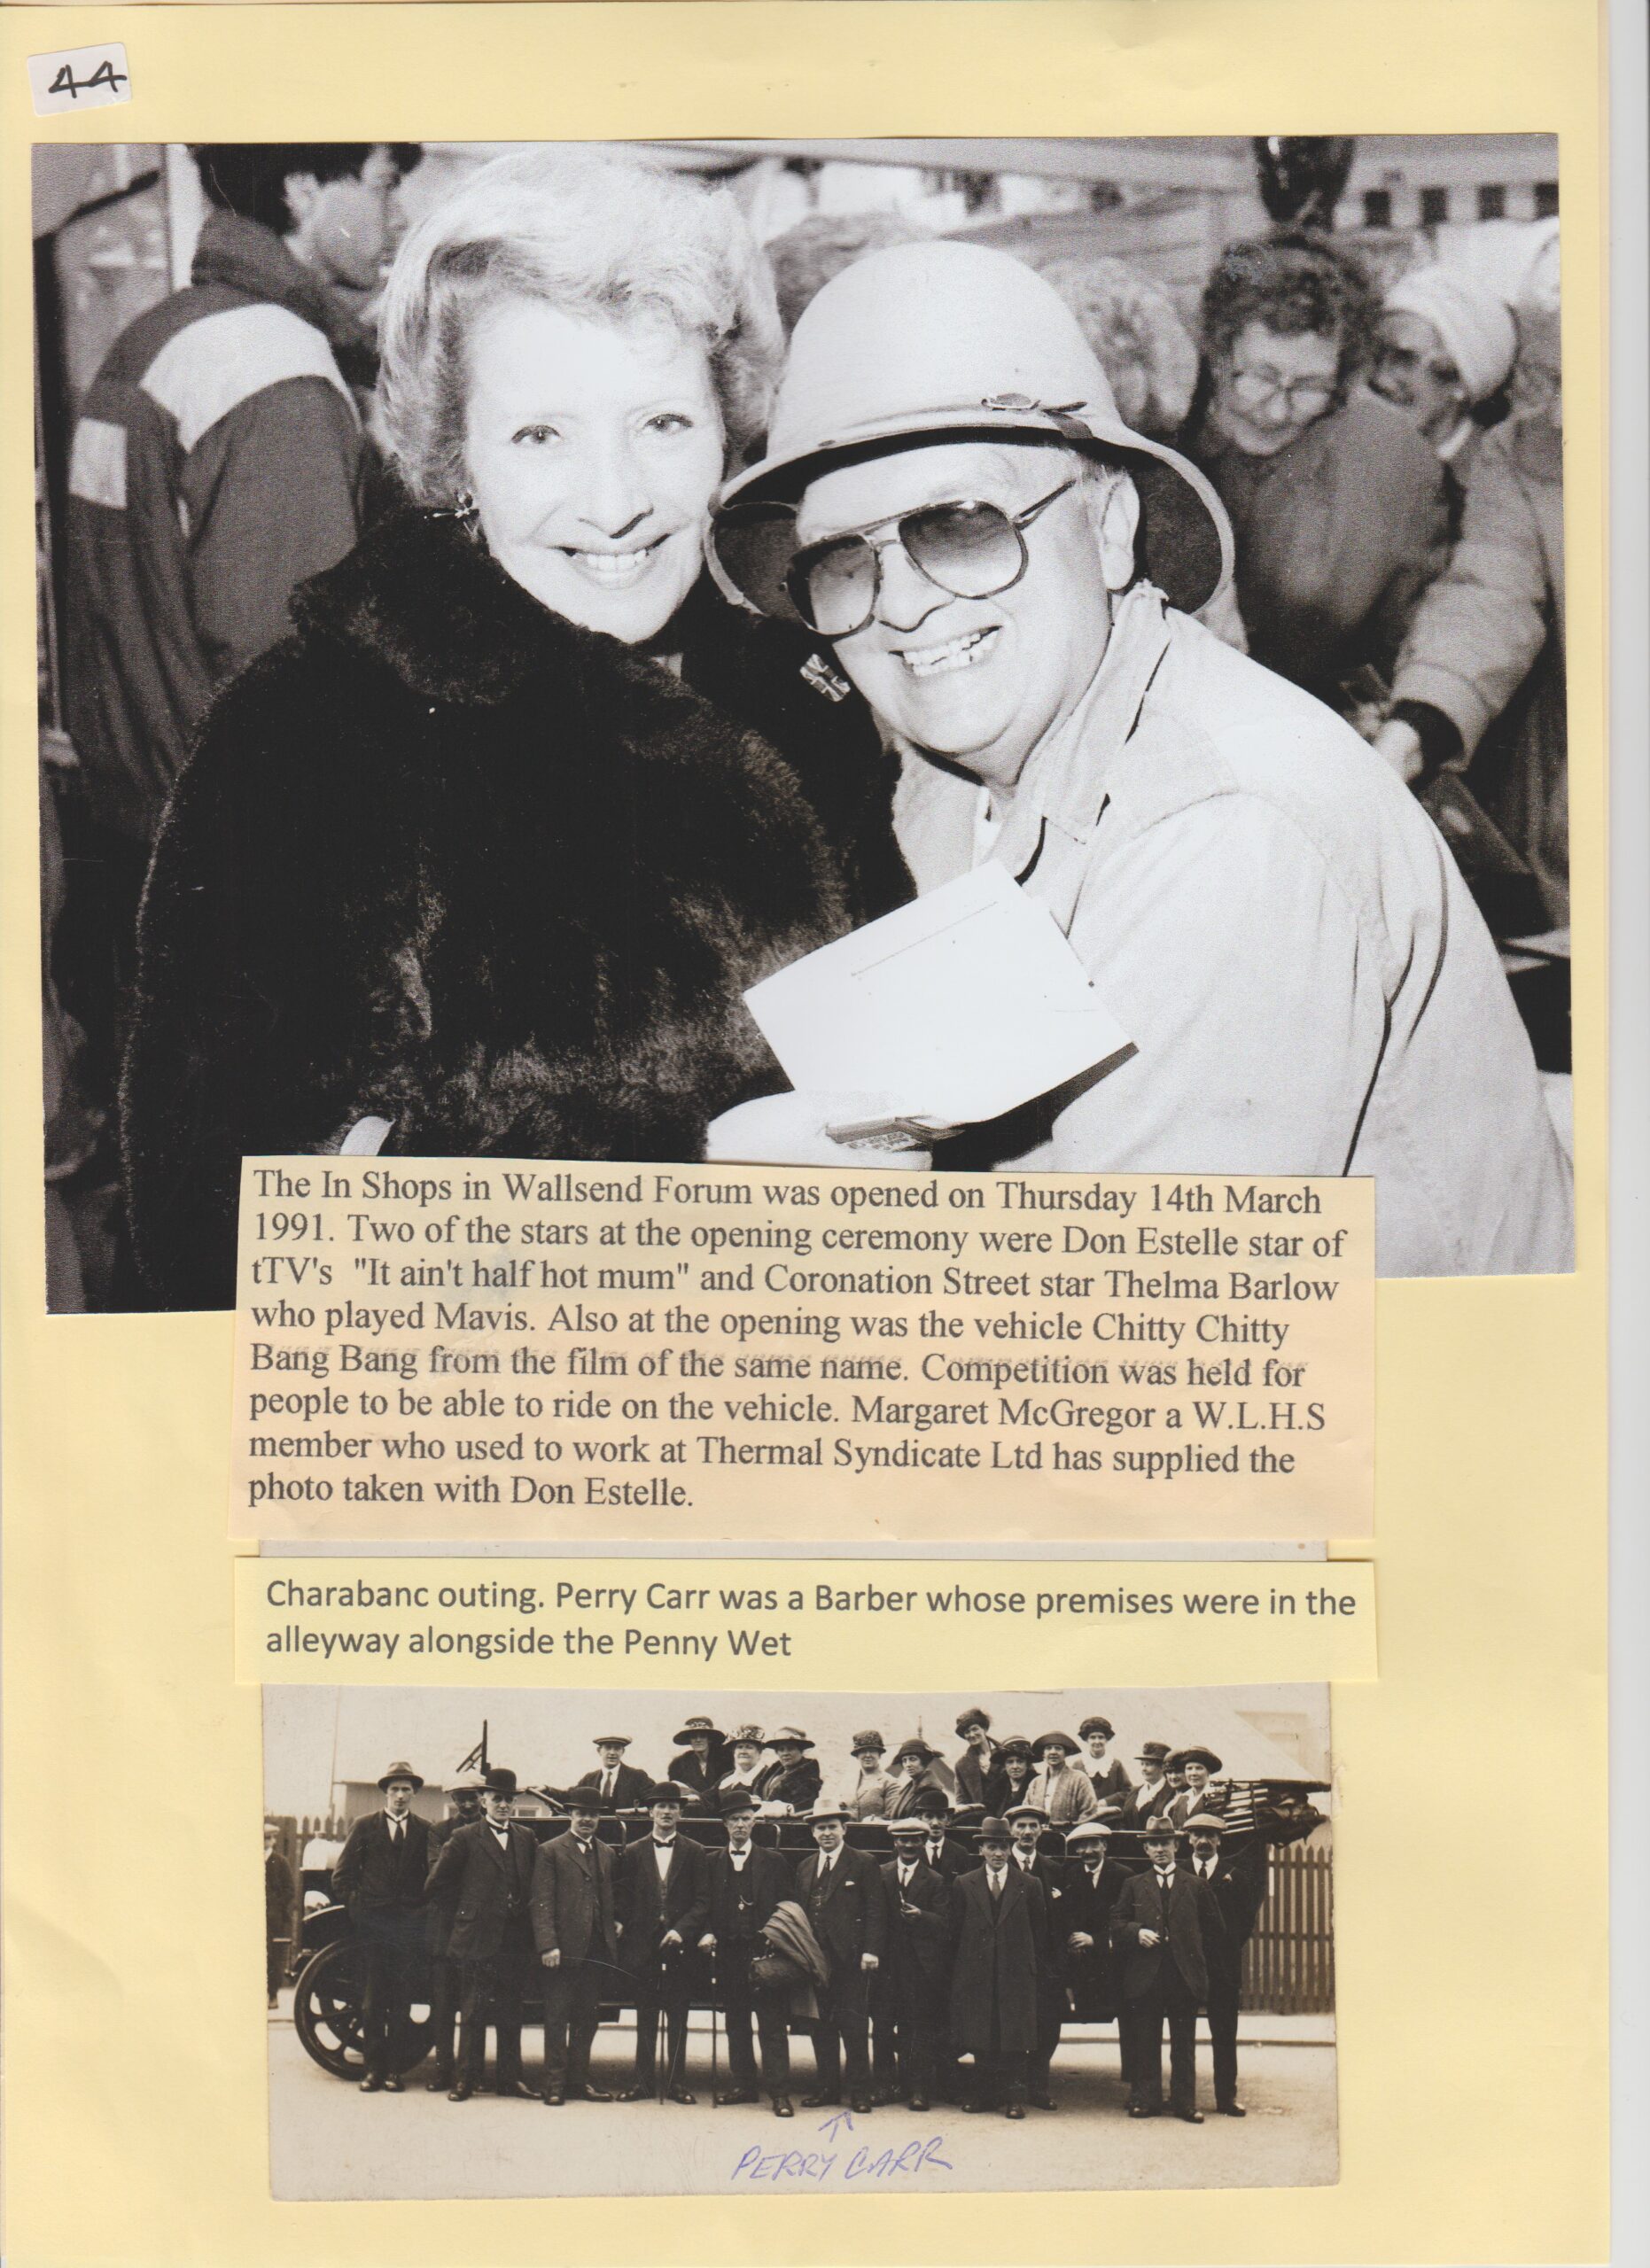 Don Estelle opening In Shops Wallsend Forum 1991 _ Charabanc outing with Perry Barr the Barber